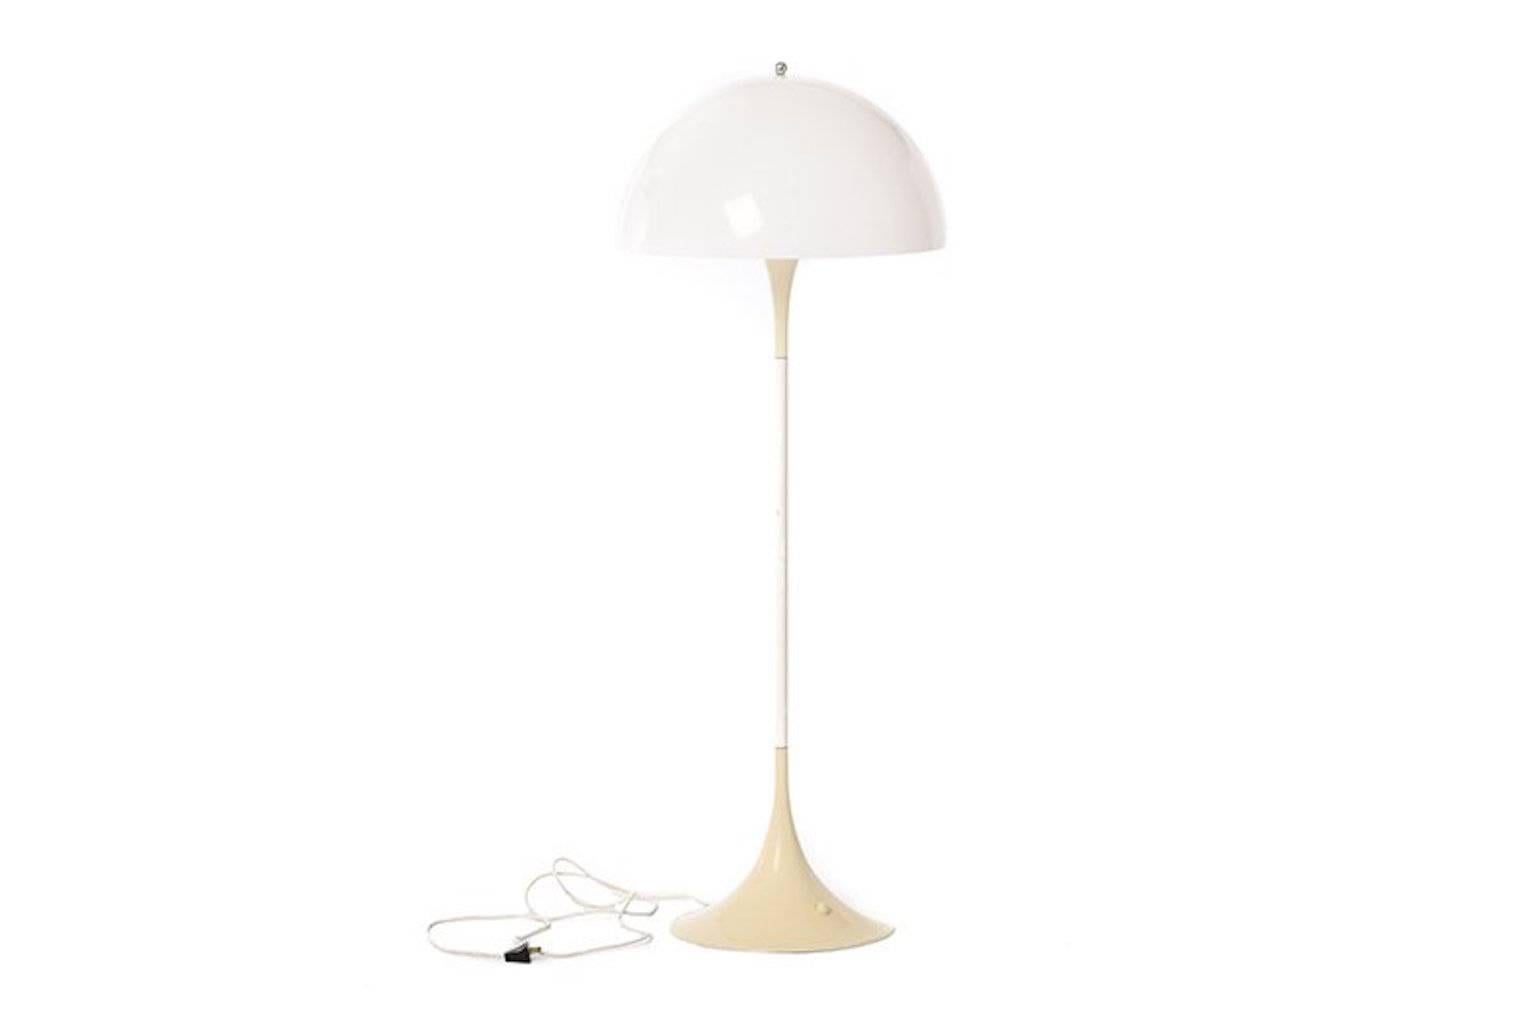 Beautiful, original lamps. Pretty, ambient glow when lit. Two lamps available. Shades are acrylic. Pricing is per lamp.
Large: 19.5" diameter x 51"h
Small: 19.5" diameter x 48.5" h